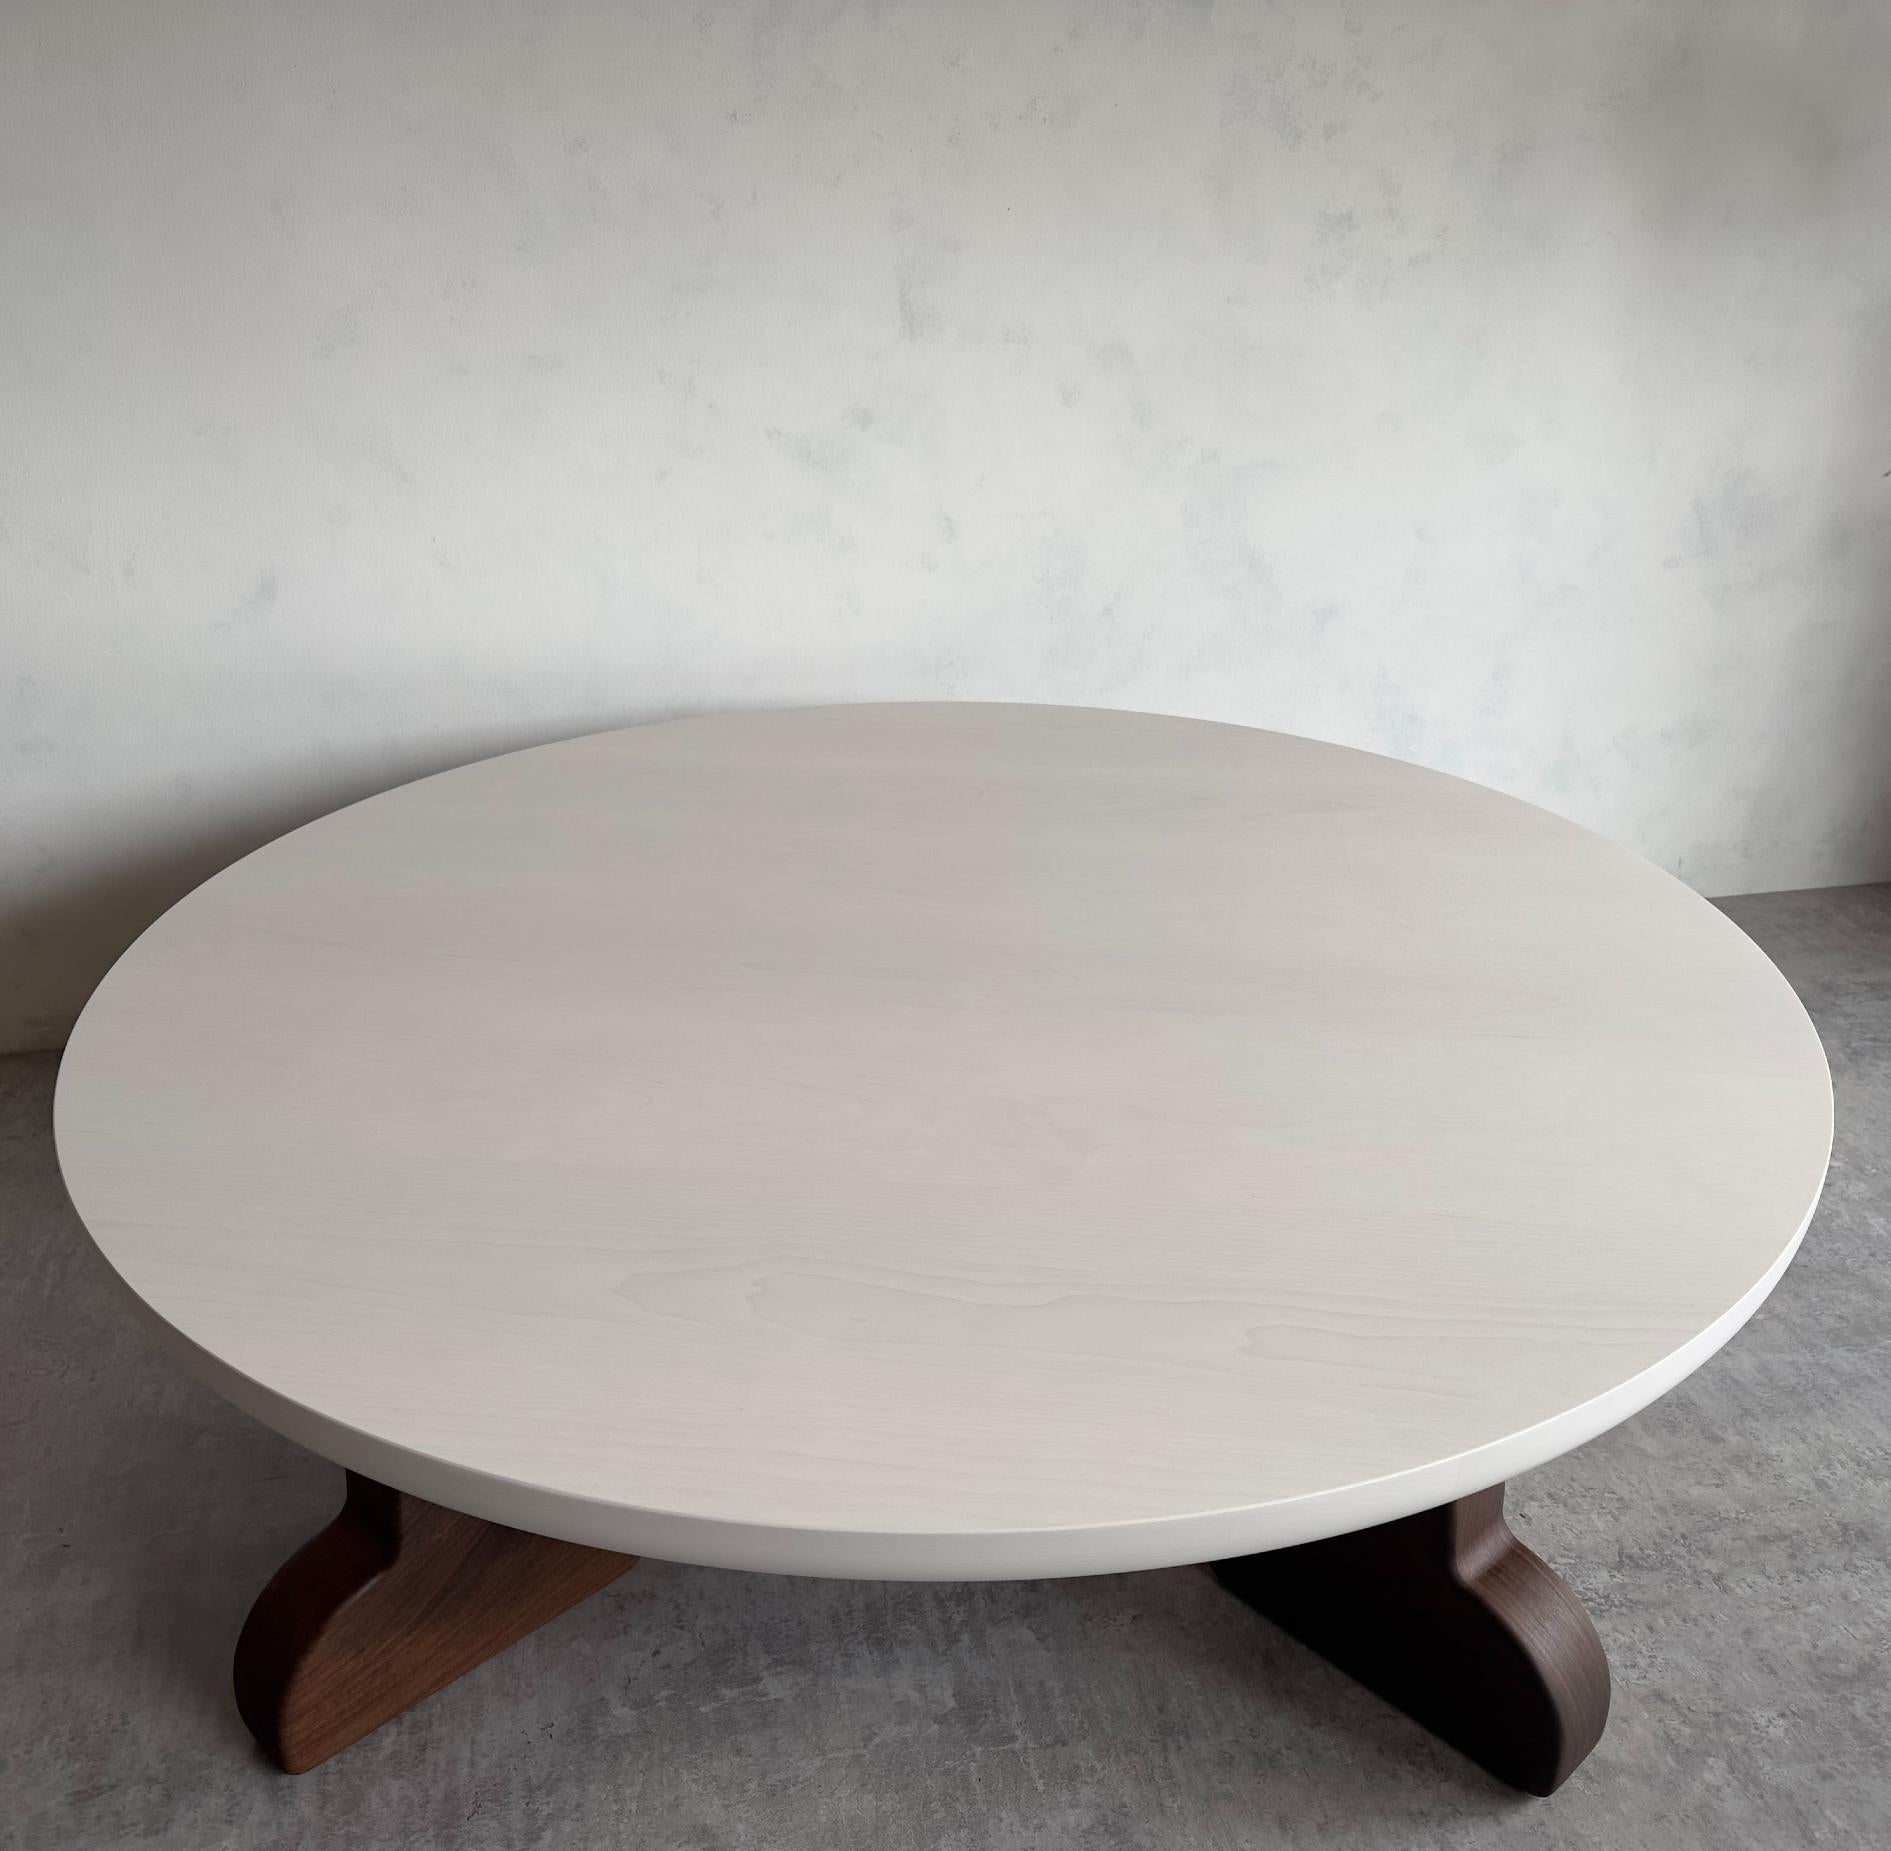 Quadruped Coffee Table by MSJ Furniture Studio In New Condition For Sale In Vancouver, BC